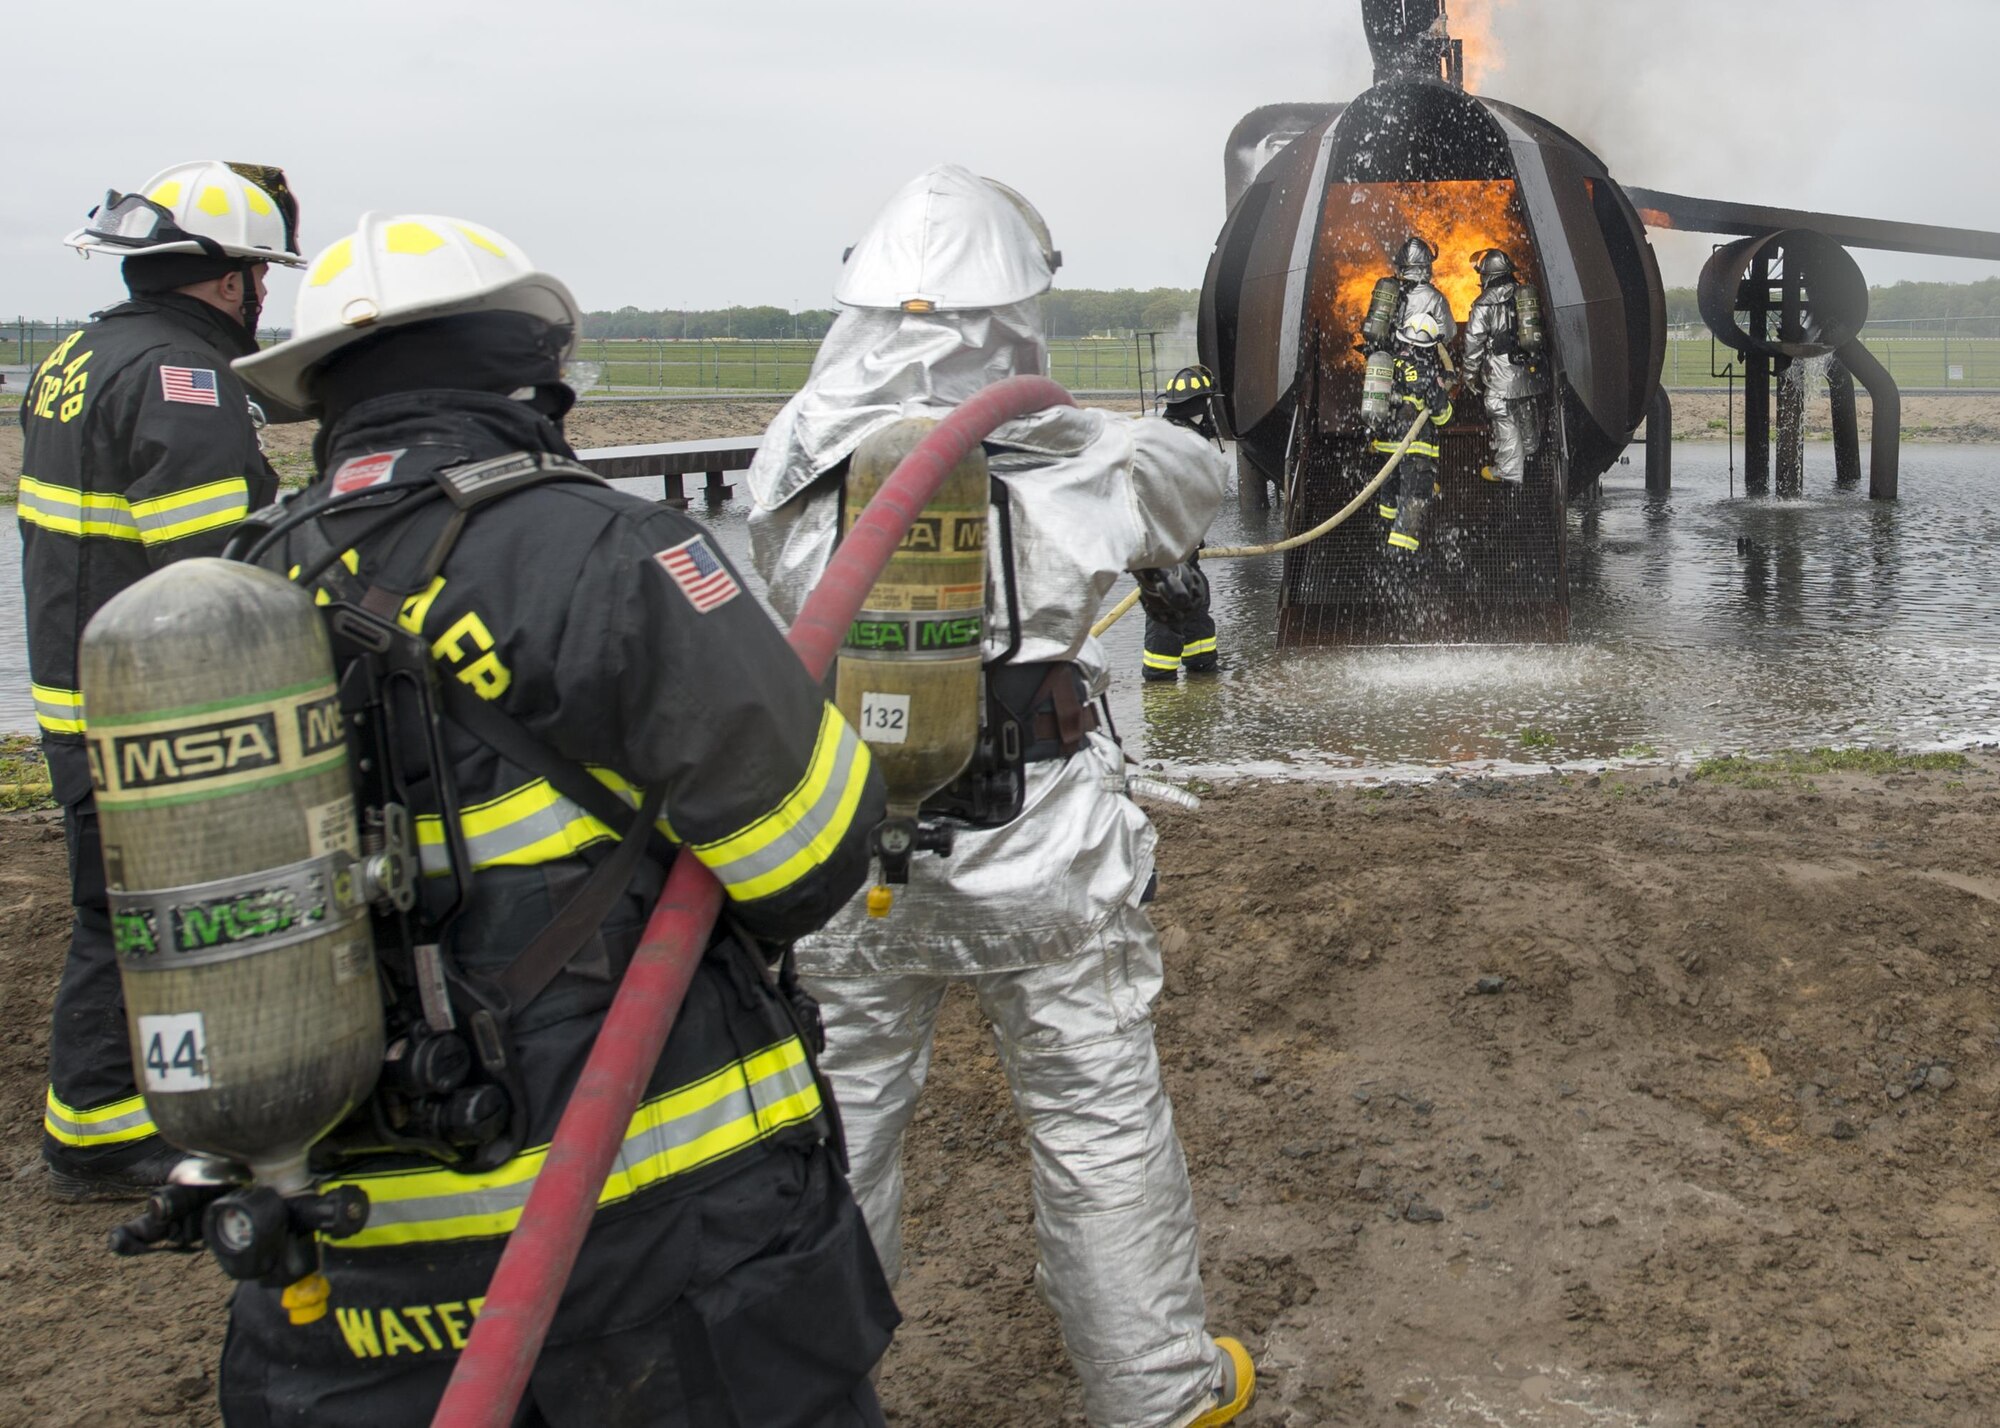 Airmen with the 512th Airlift Wing train fire-fighting skills as they extinguish an aircraft fire at Dover Air Force Base Del., April 23, 2016. This training occurs twice a year to keep the fire fighters current and proficient in their training requirements. (U.S. Air Force photo byTech. Sgt. Nathan Rivard)